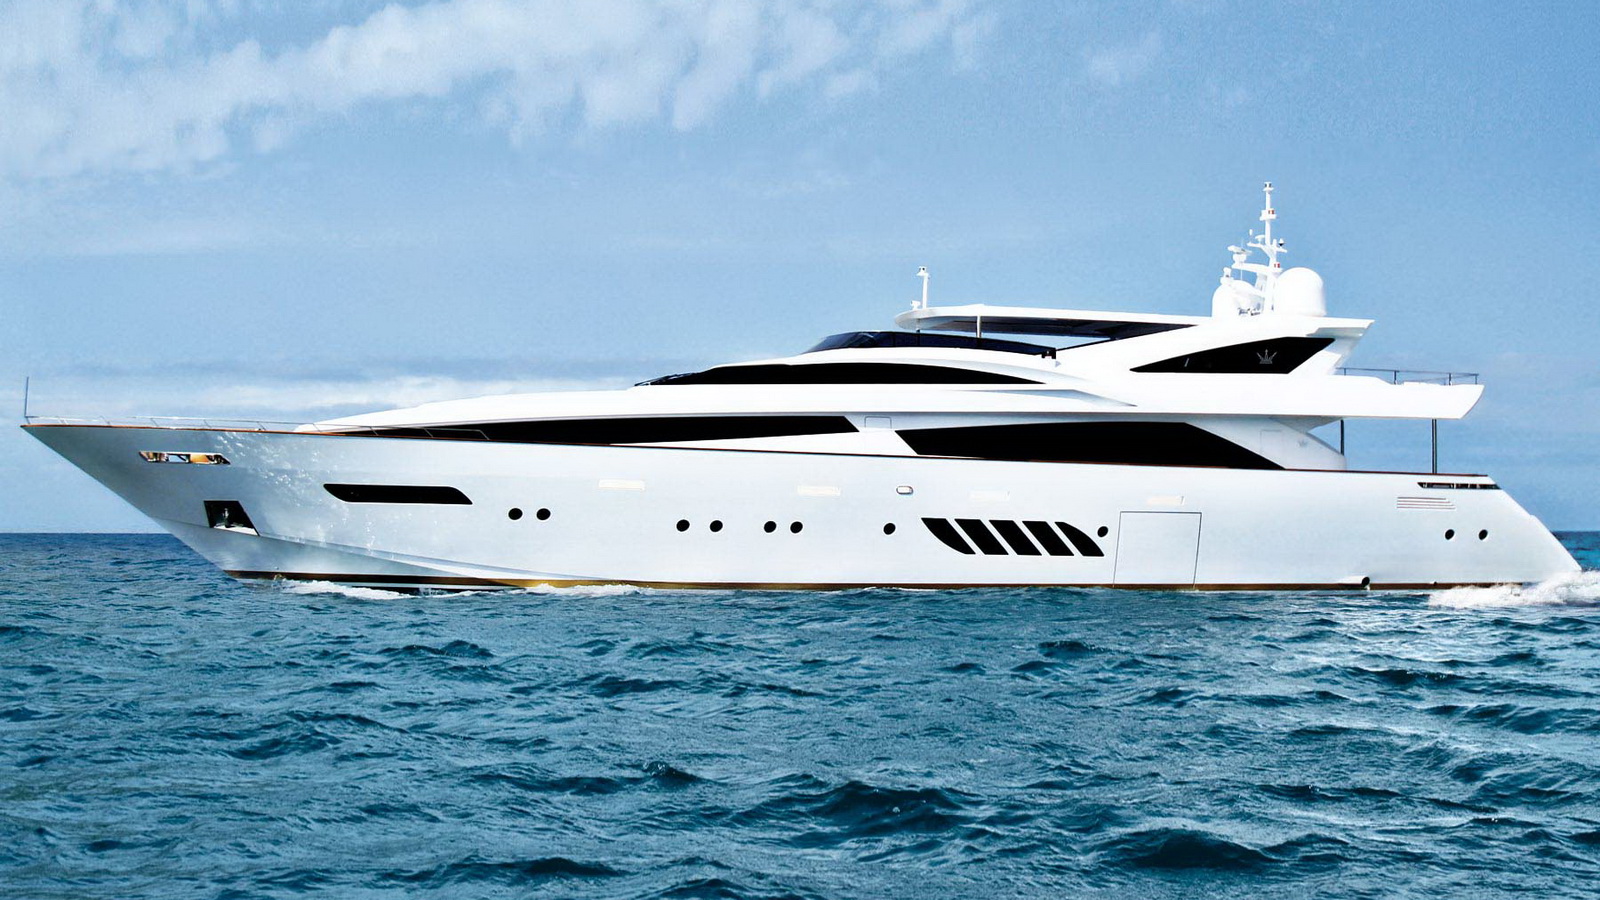 40 m yacht for sale